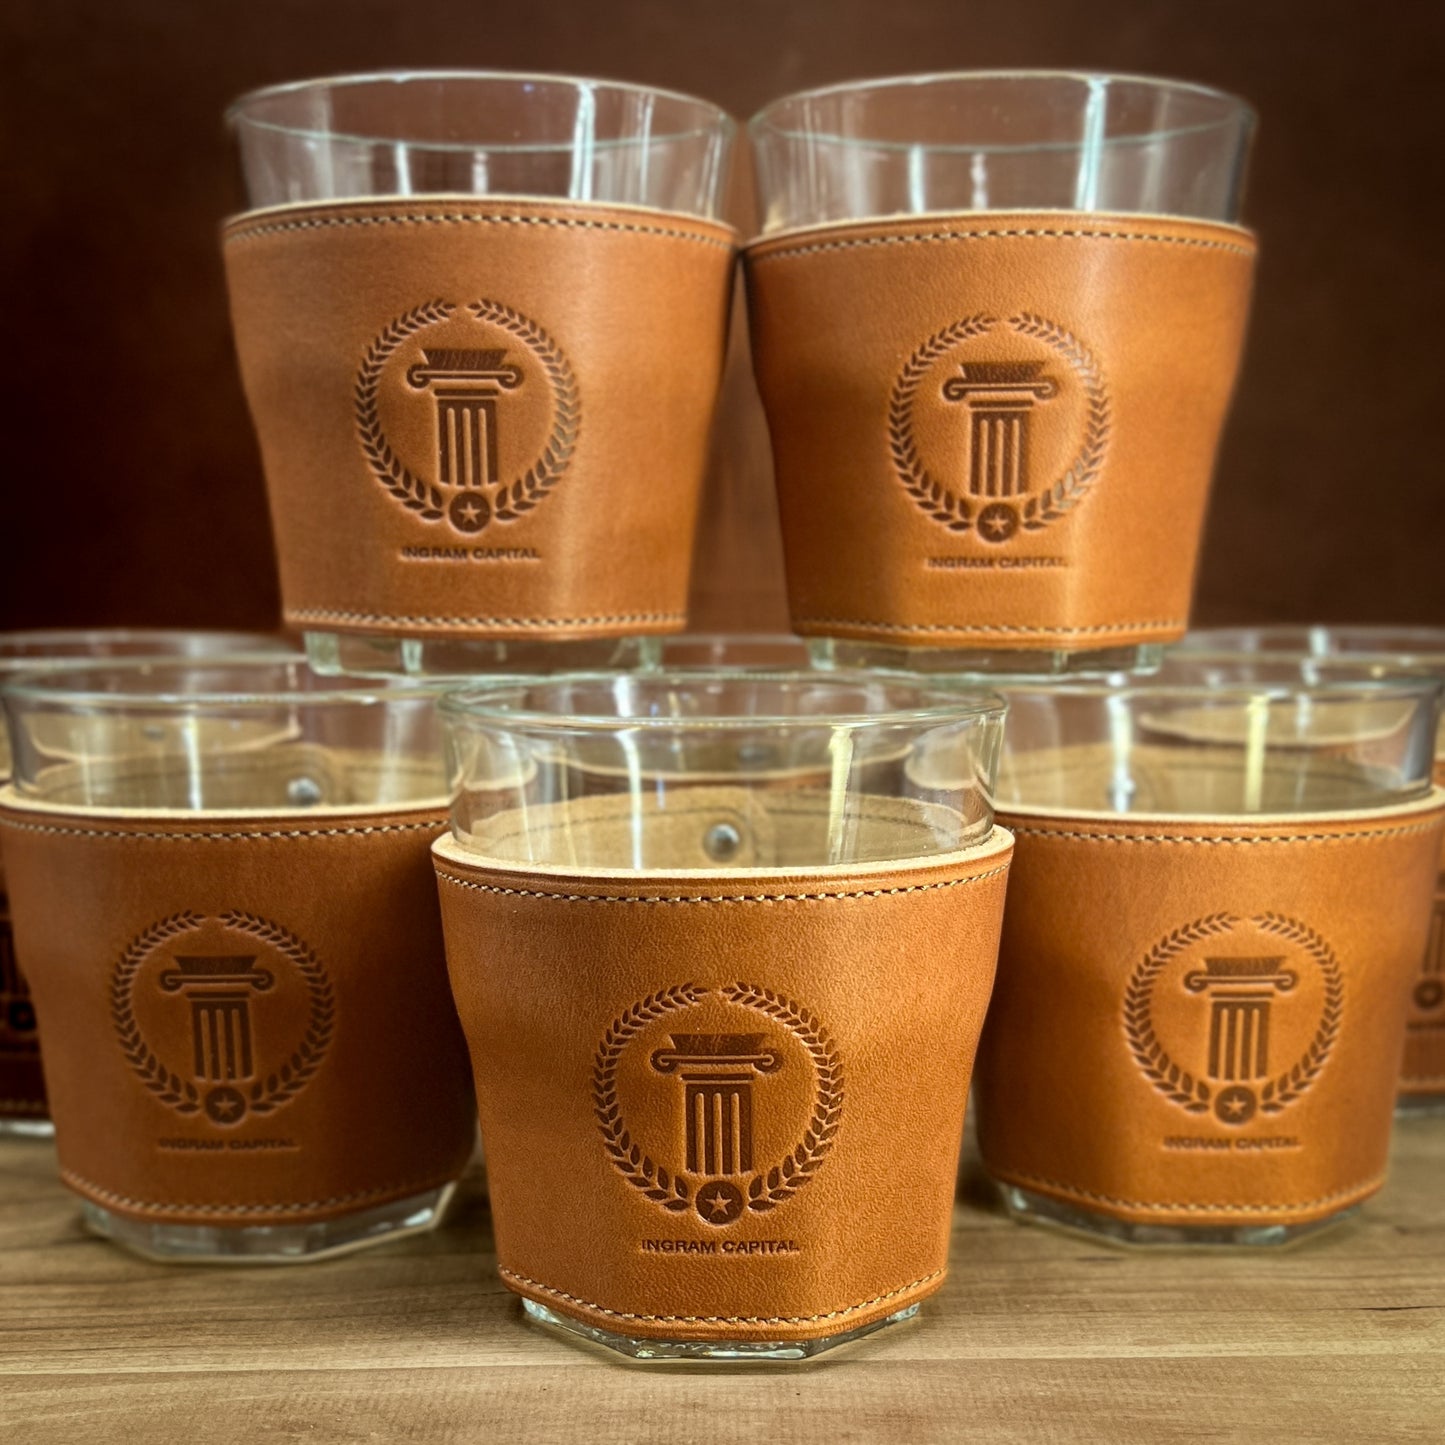 Ingram Capital Promotional Whiskey Glass Gifts in Horween Leather.